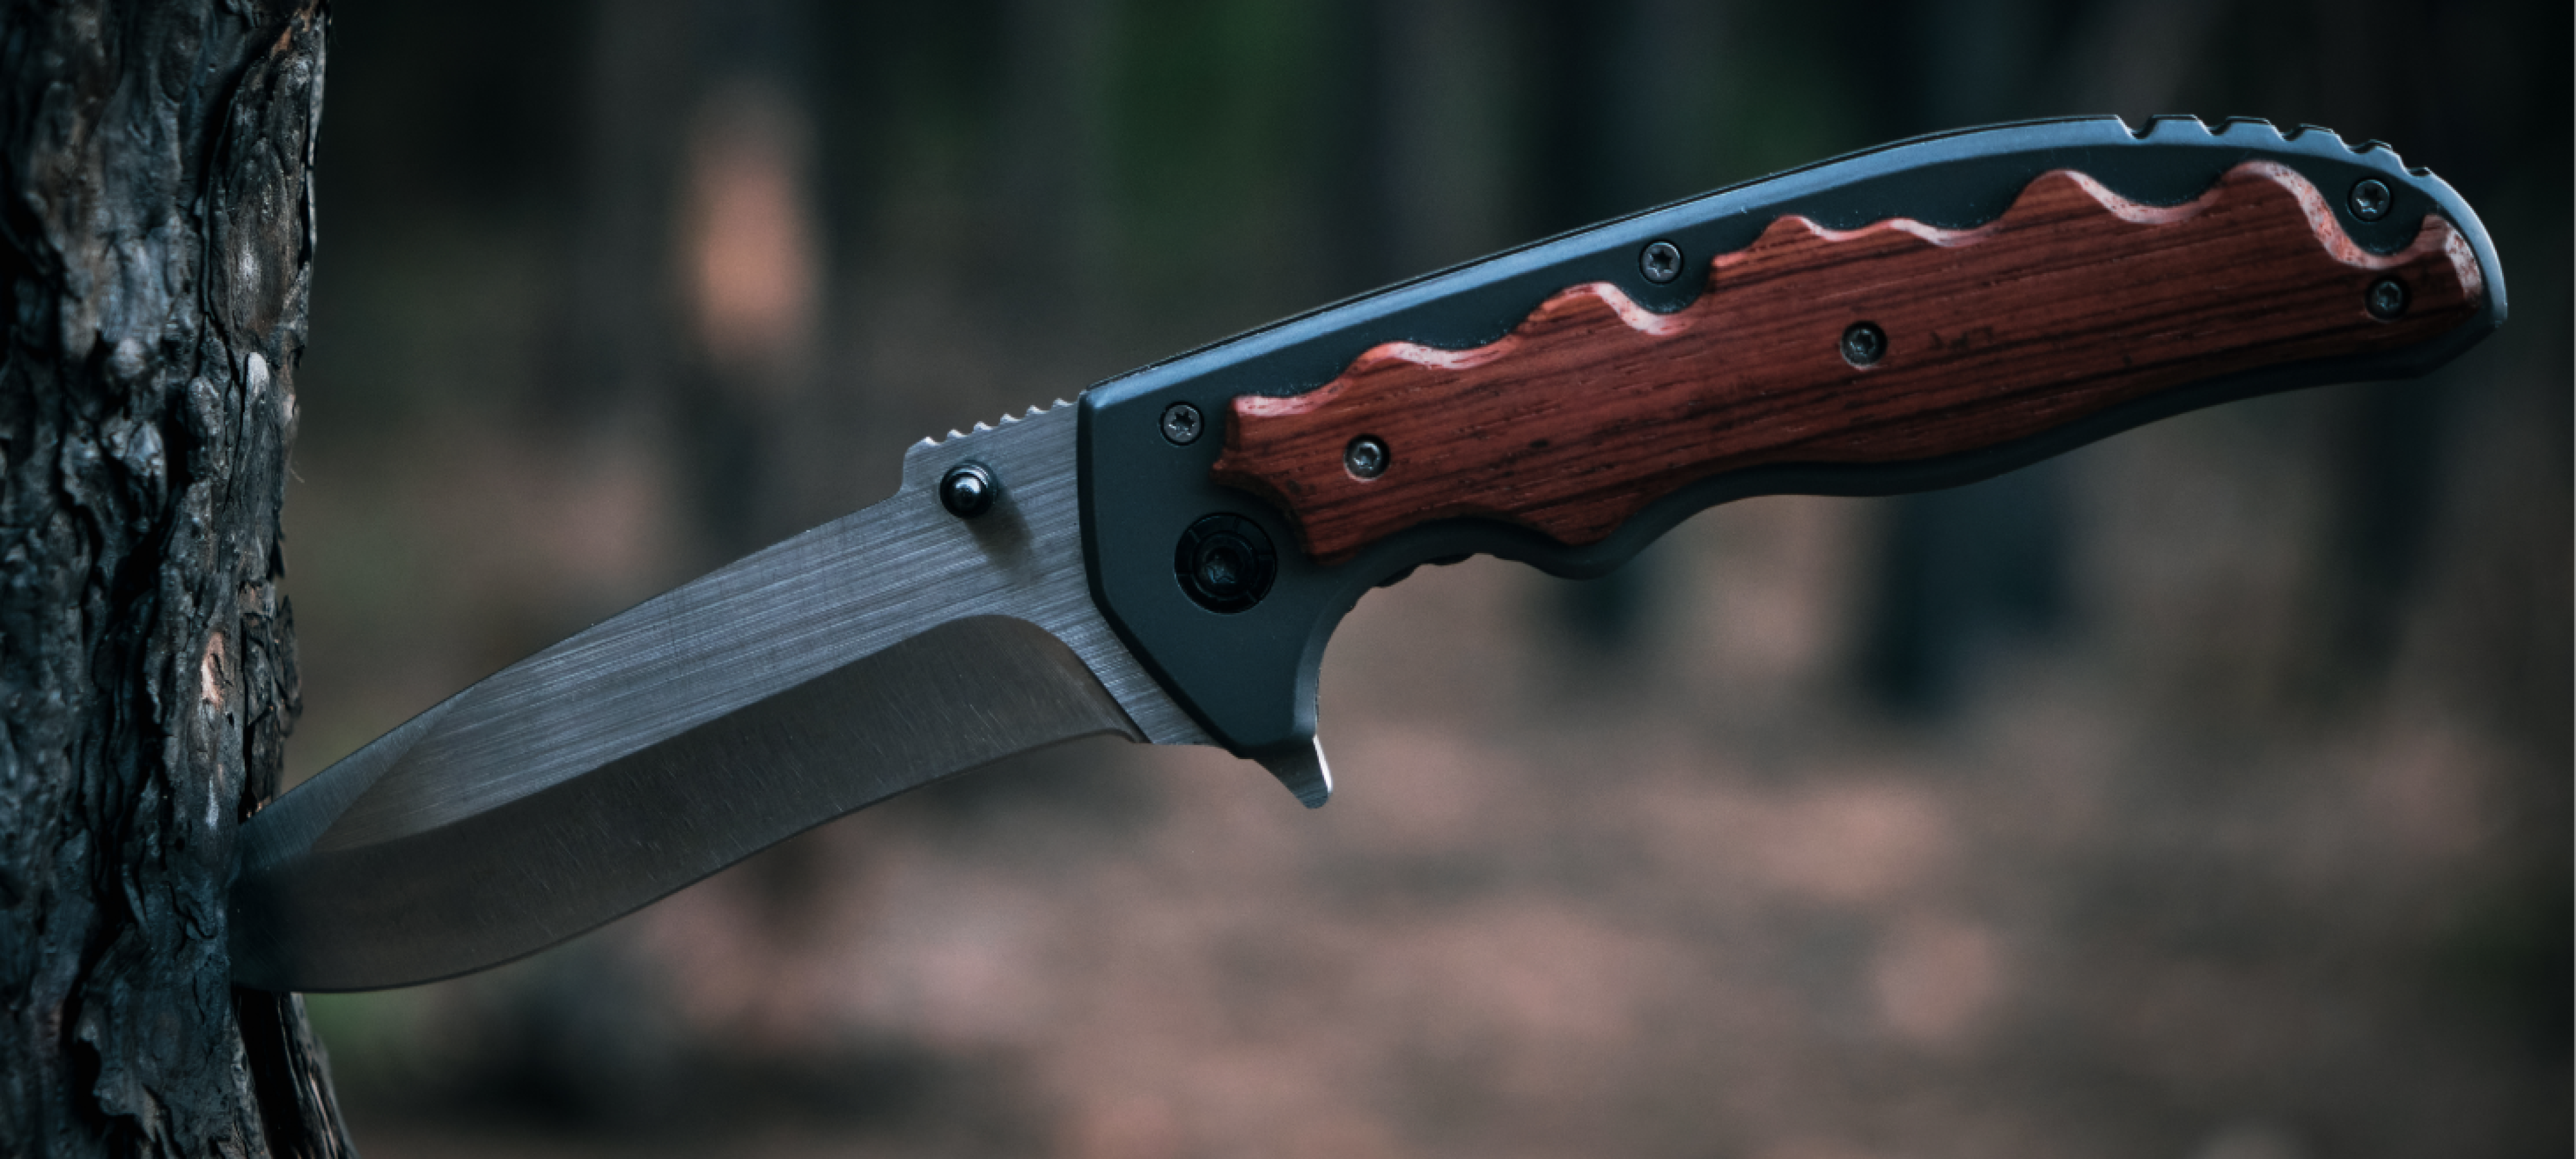 Best Survival Knife with Firestarter – A Guide to Choose the Best